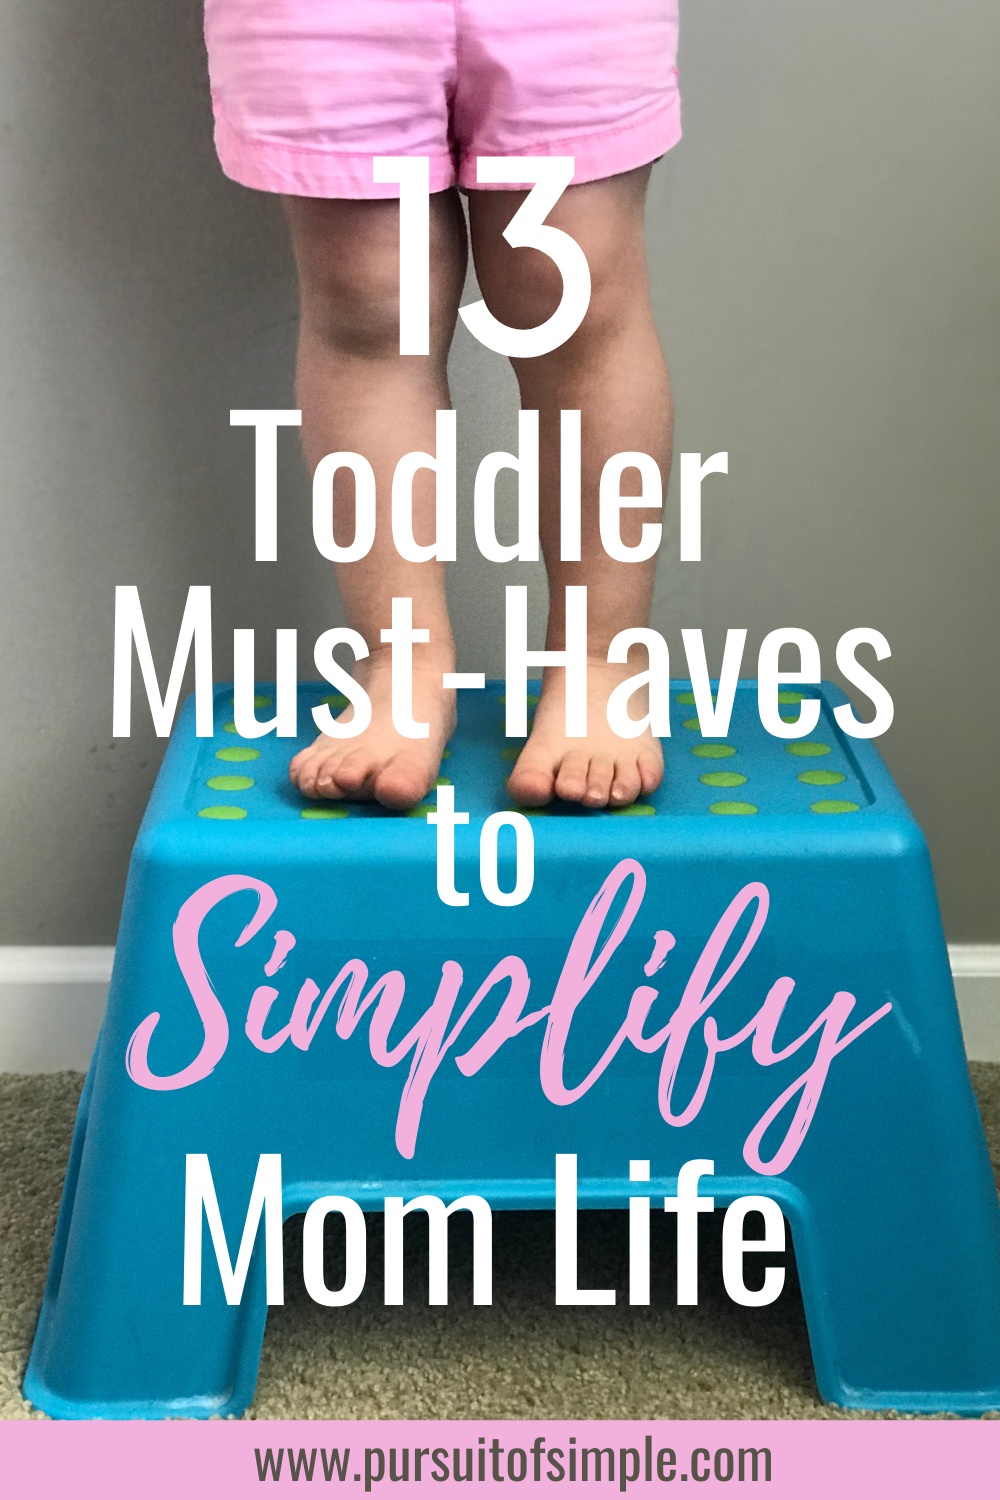 11 Essential Items For Two-Year-Old's - Best Money Mom